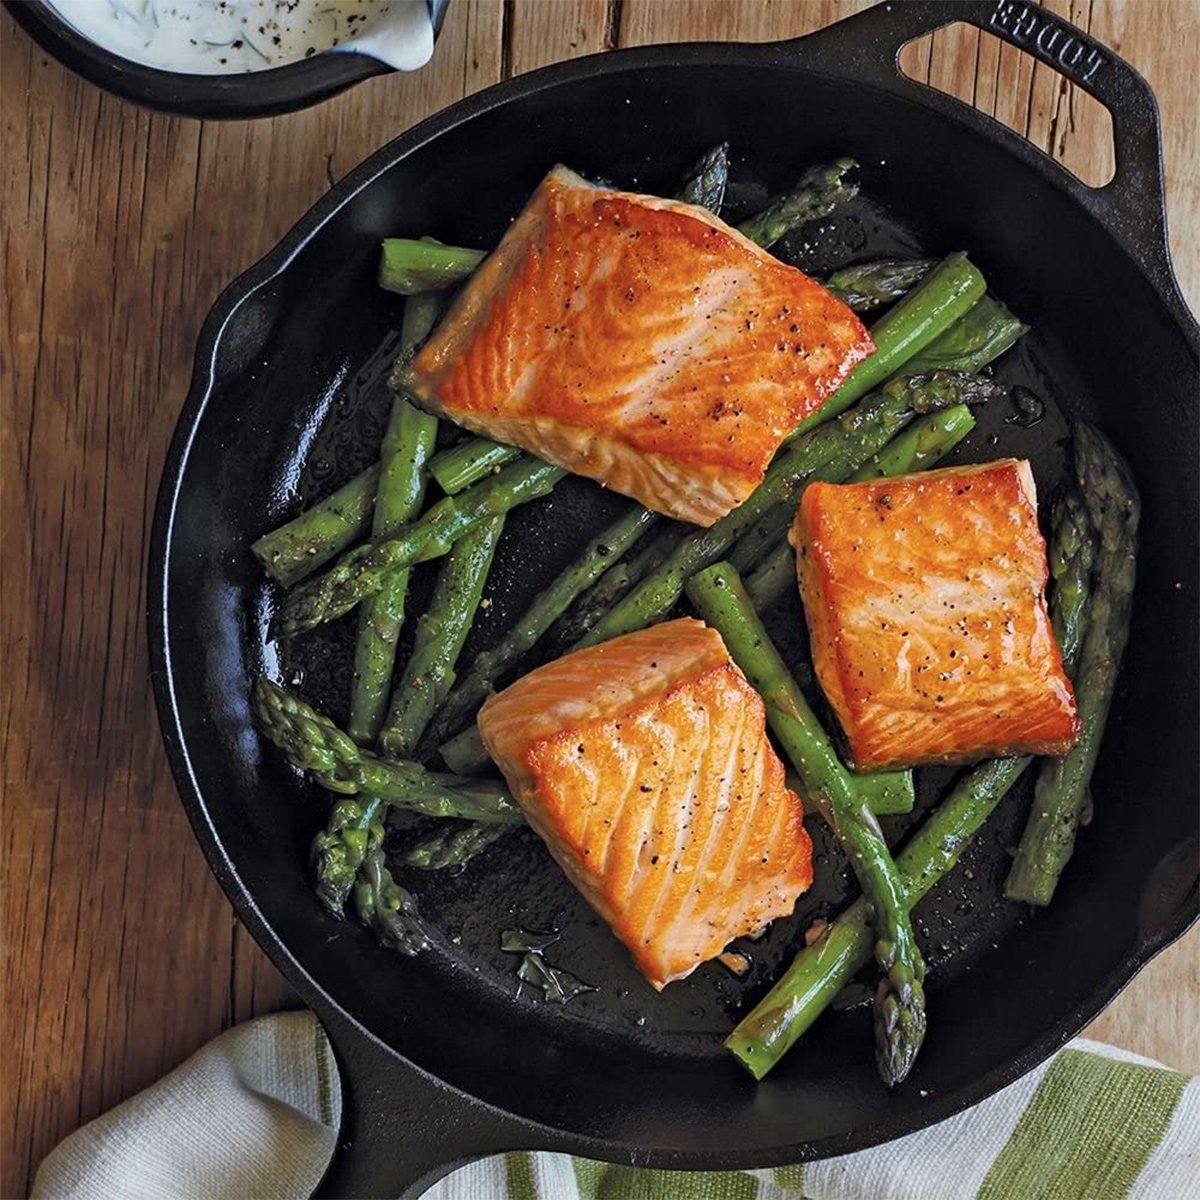 This 5-Star Rated Cast-Iron Lodge Skillet Is Just $20 Right Now